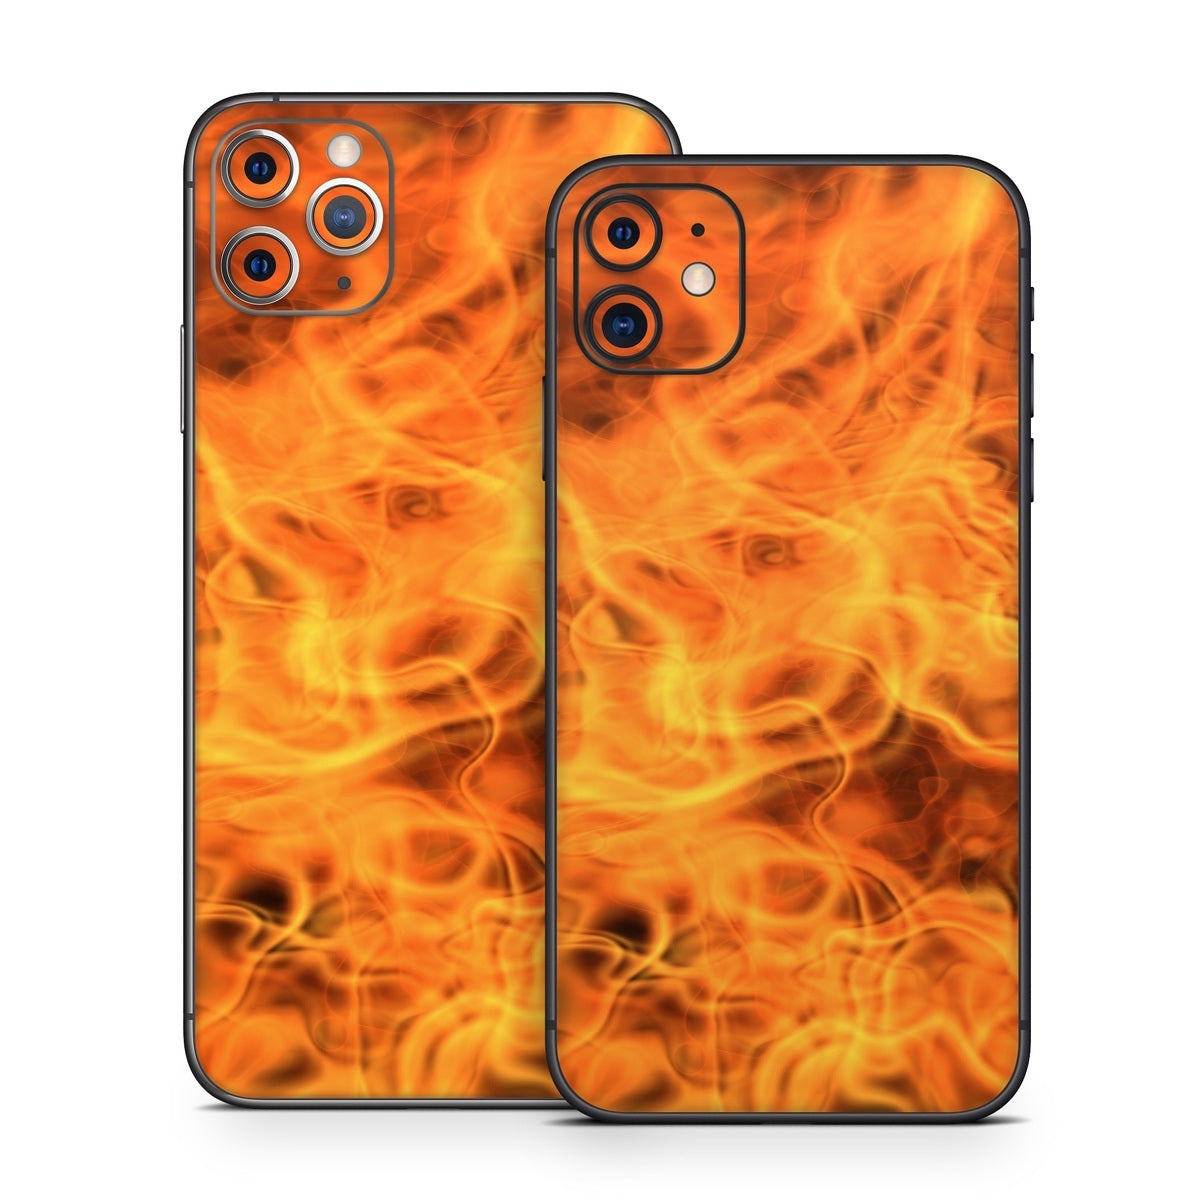 Combustion - Apple iPhone 11 Skin